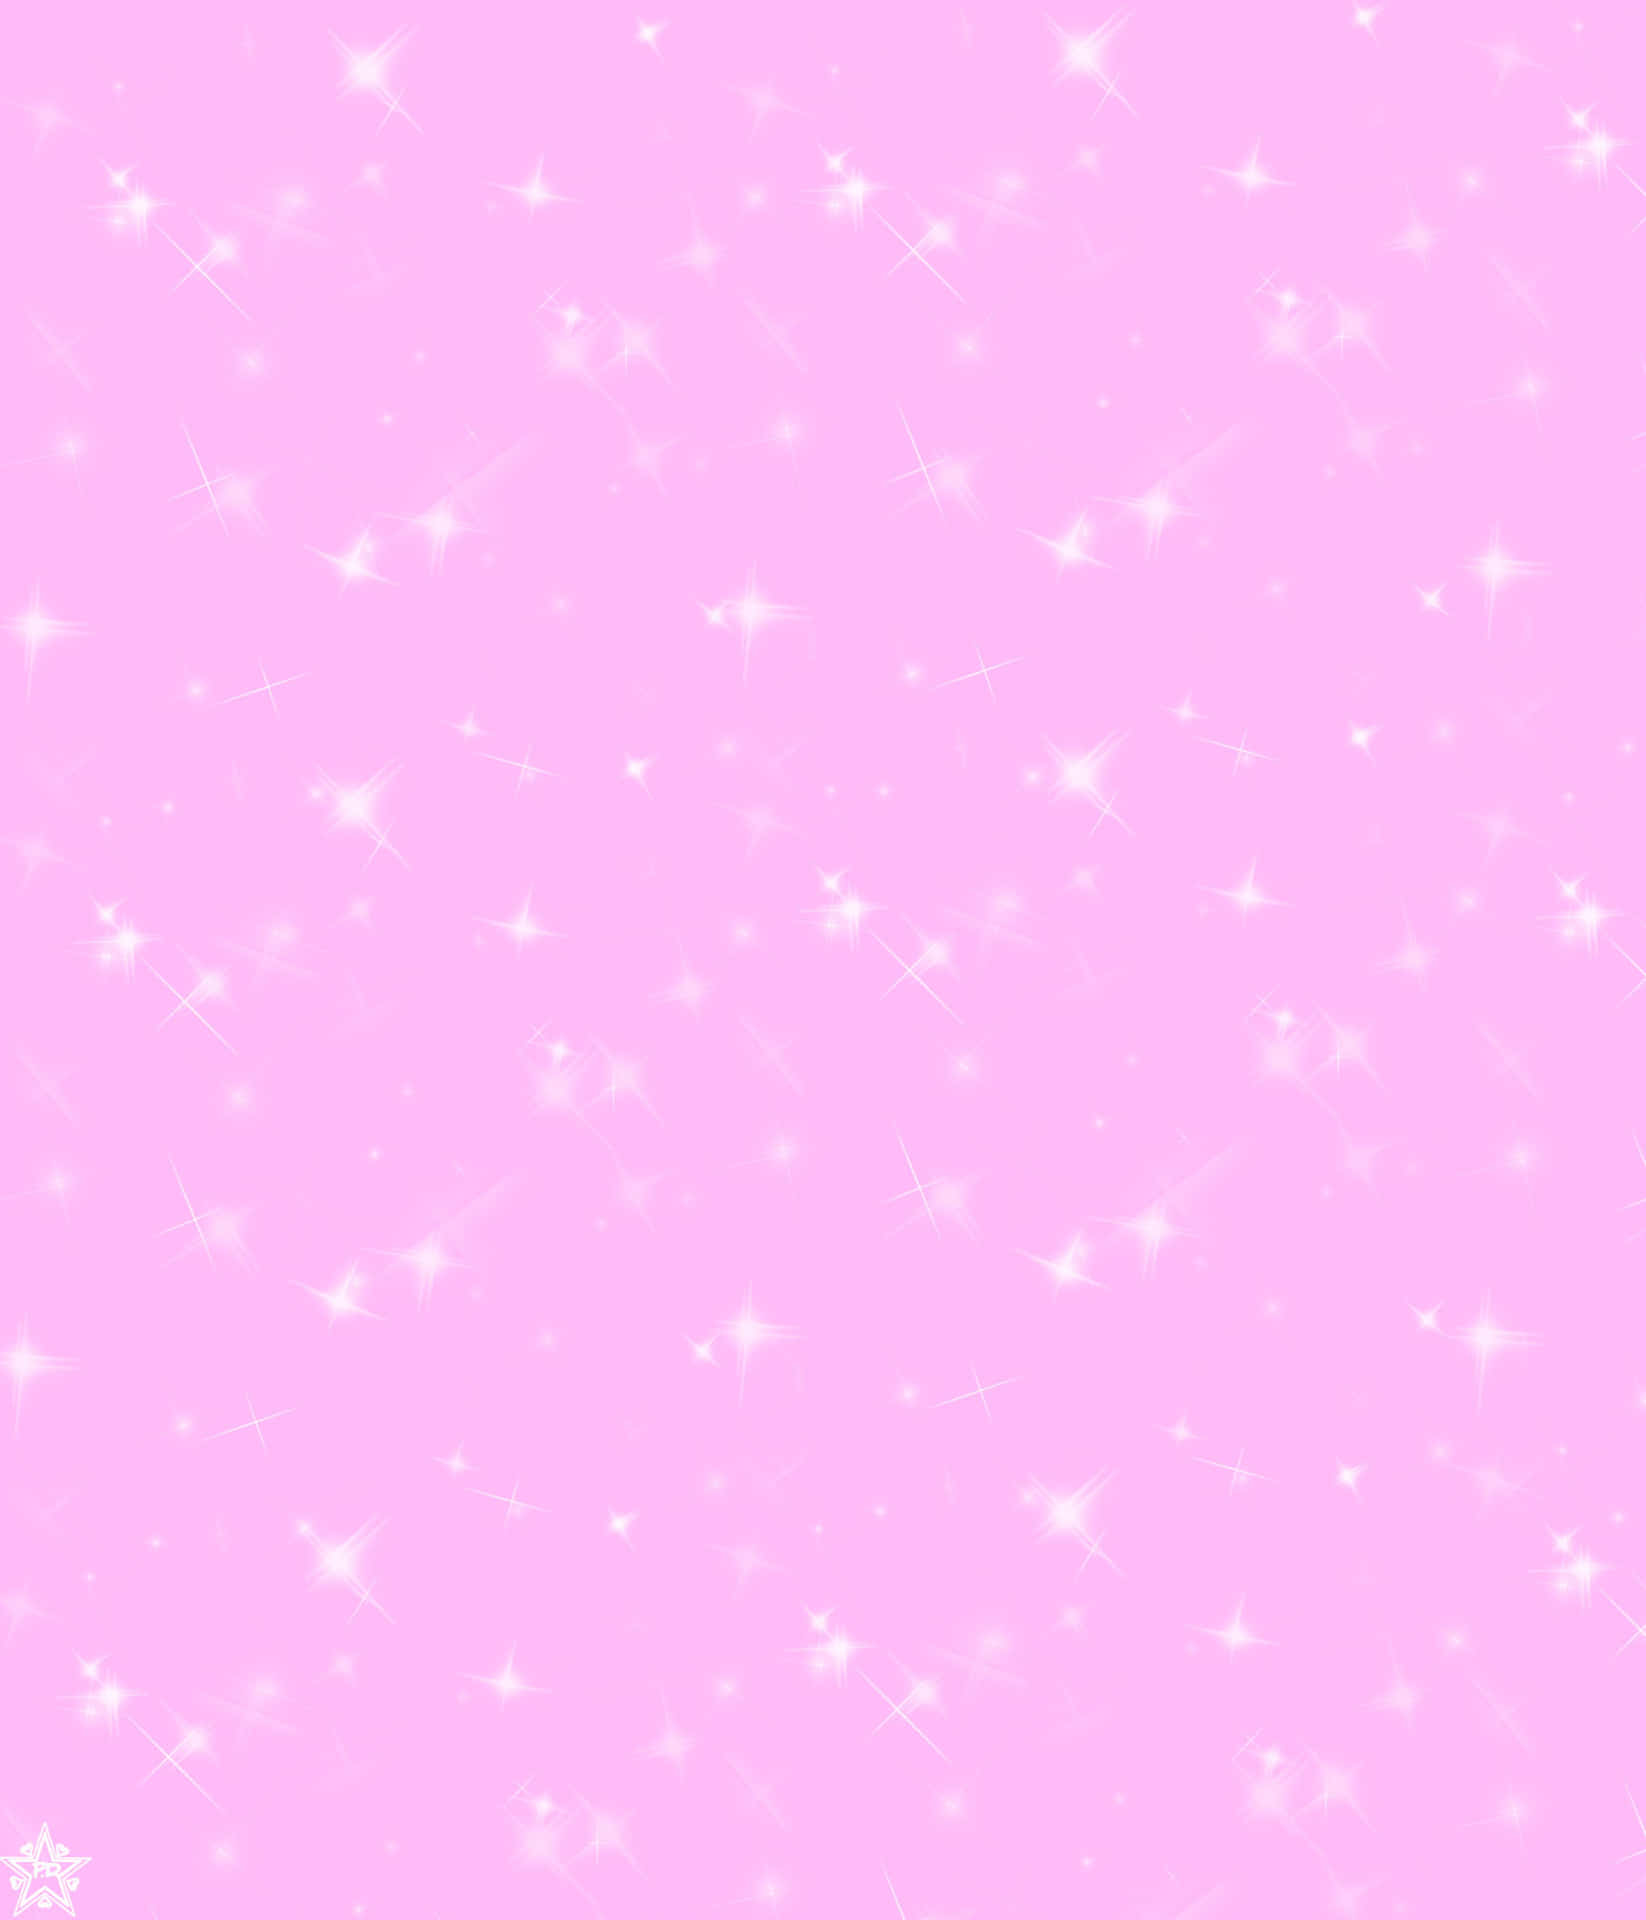 A Pink Background With Stars On It